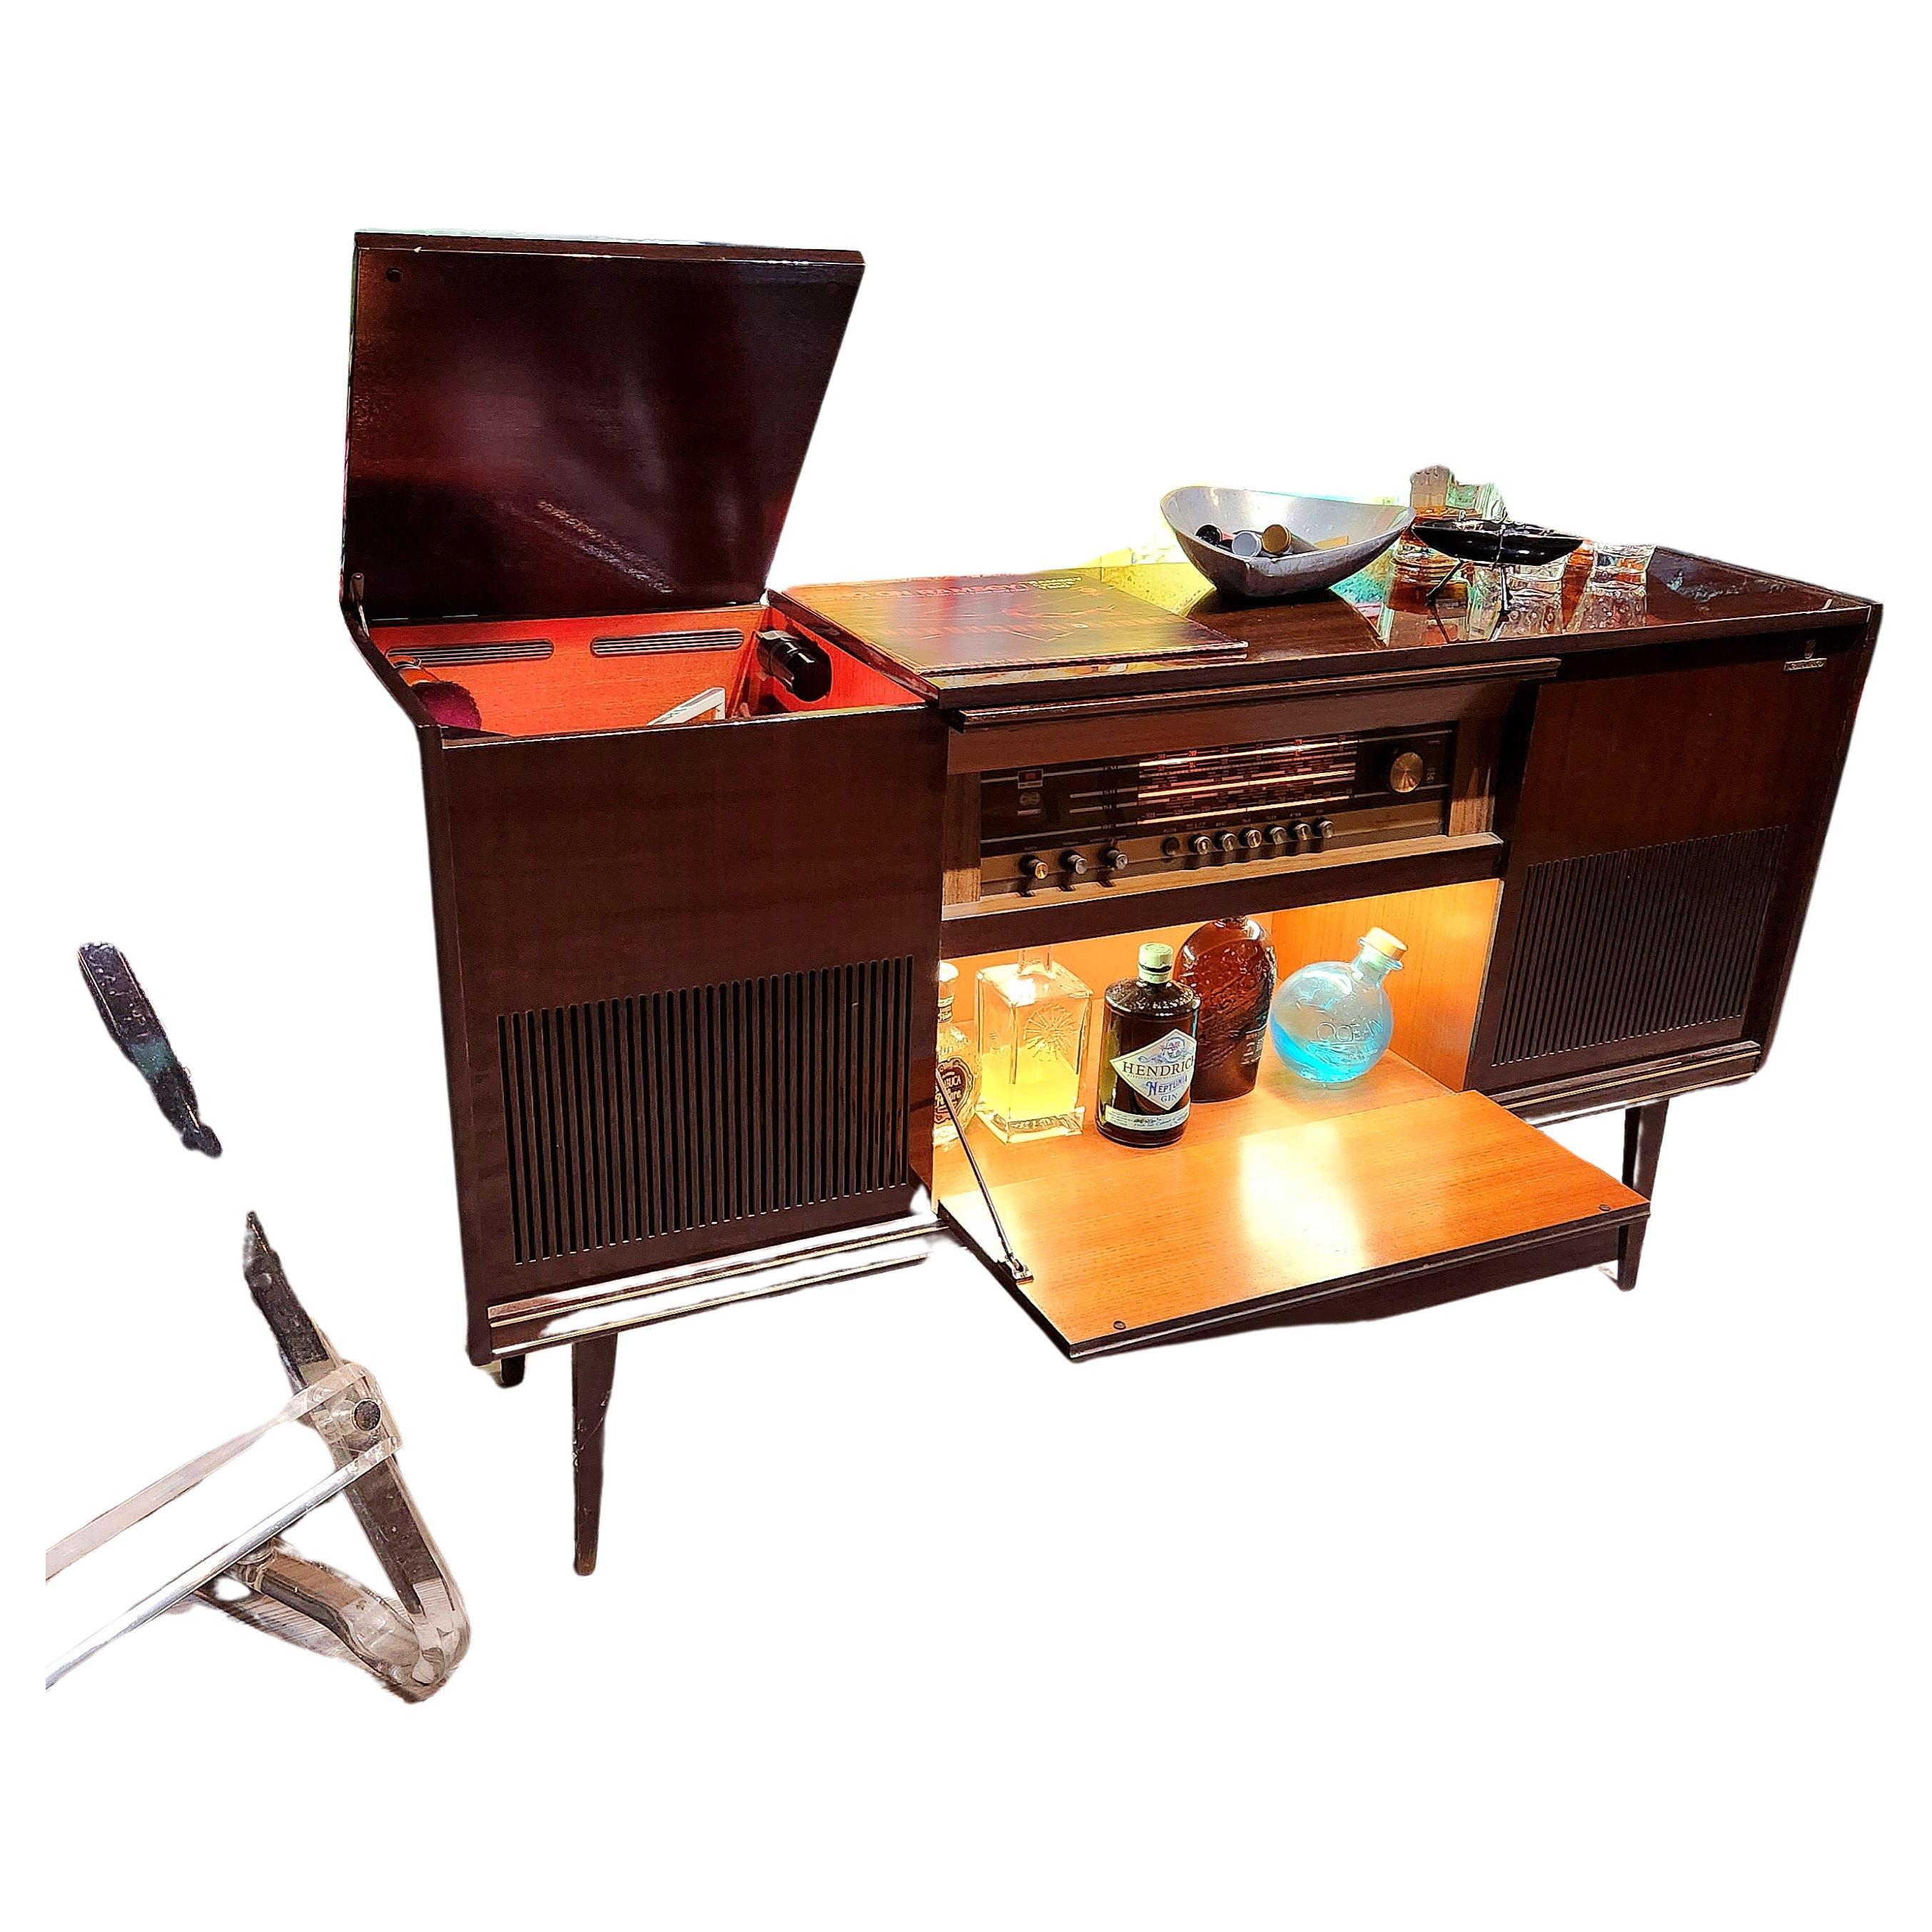 
“If art decorates space… and music is the art that decorates time, then our vintage stereo consoles decorate lives by accentuating both.”

This console:
This is a console refurbished by us.  We acquire our pieces from very reliable, established,